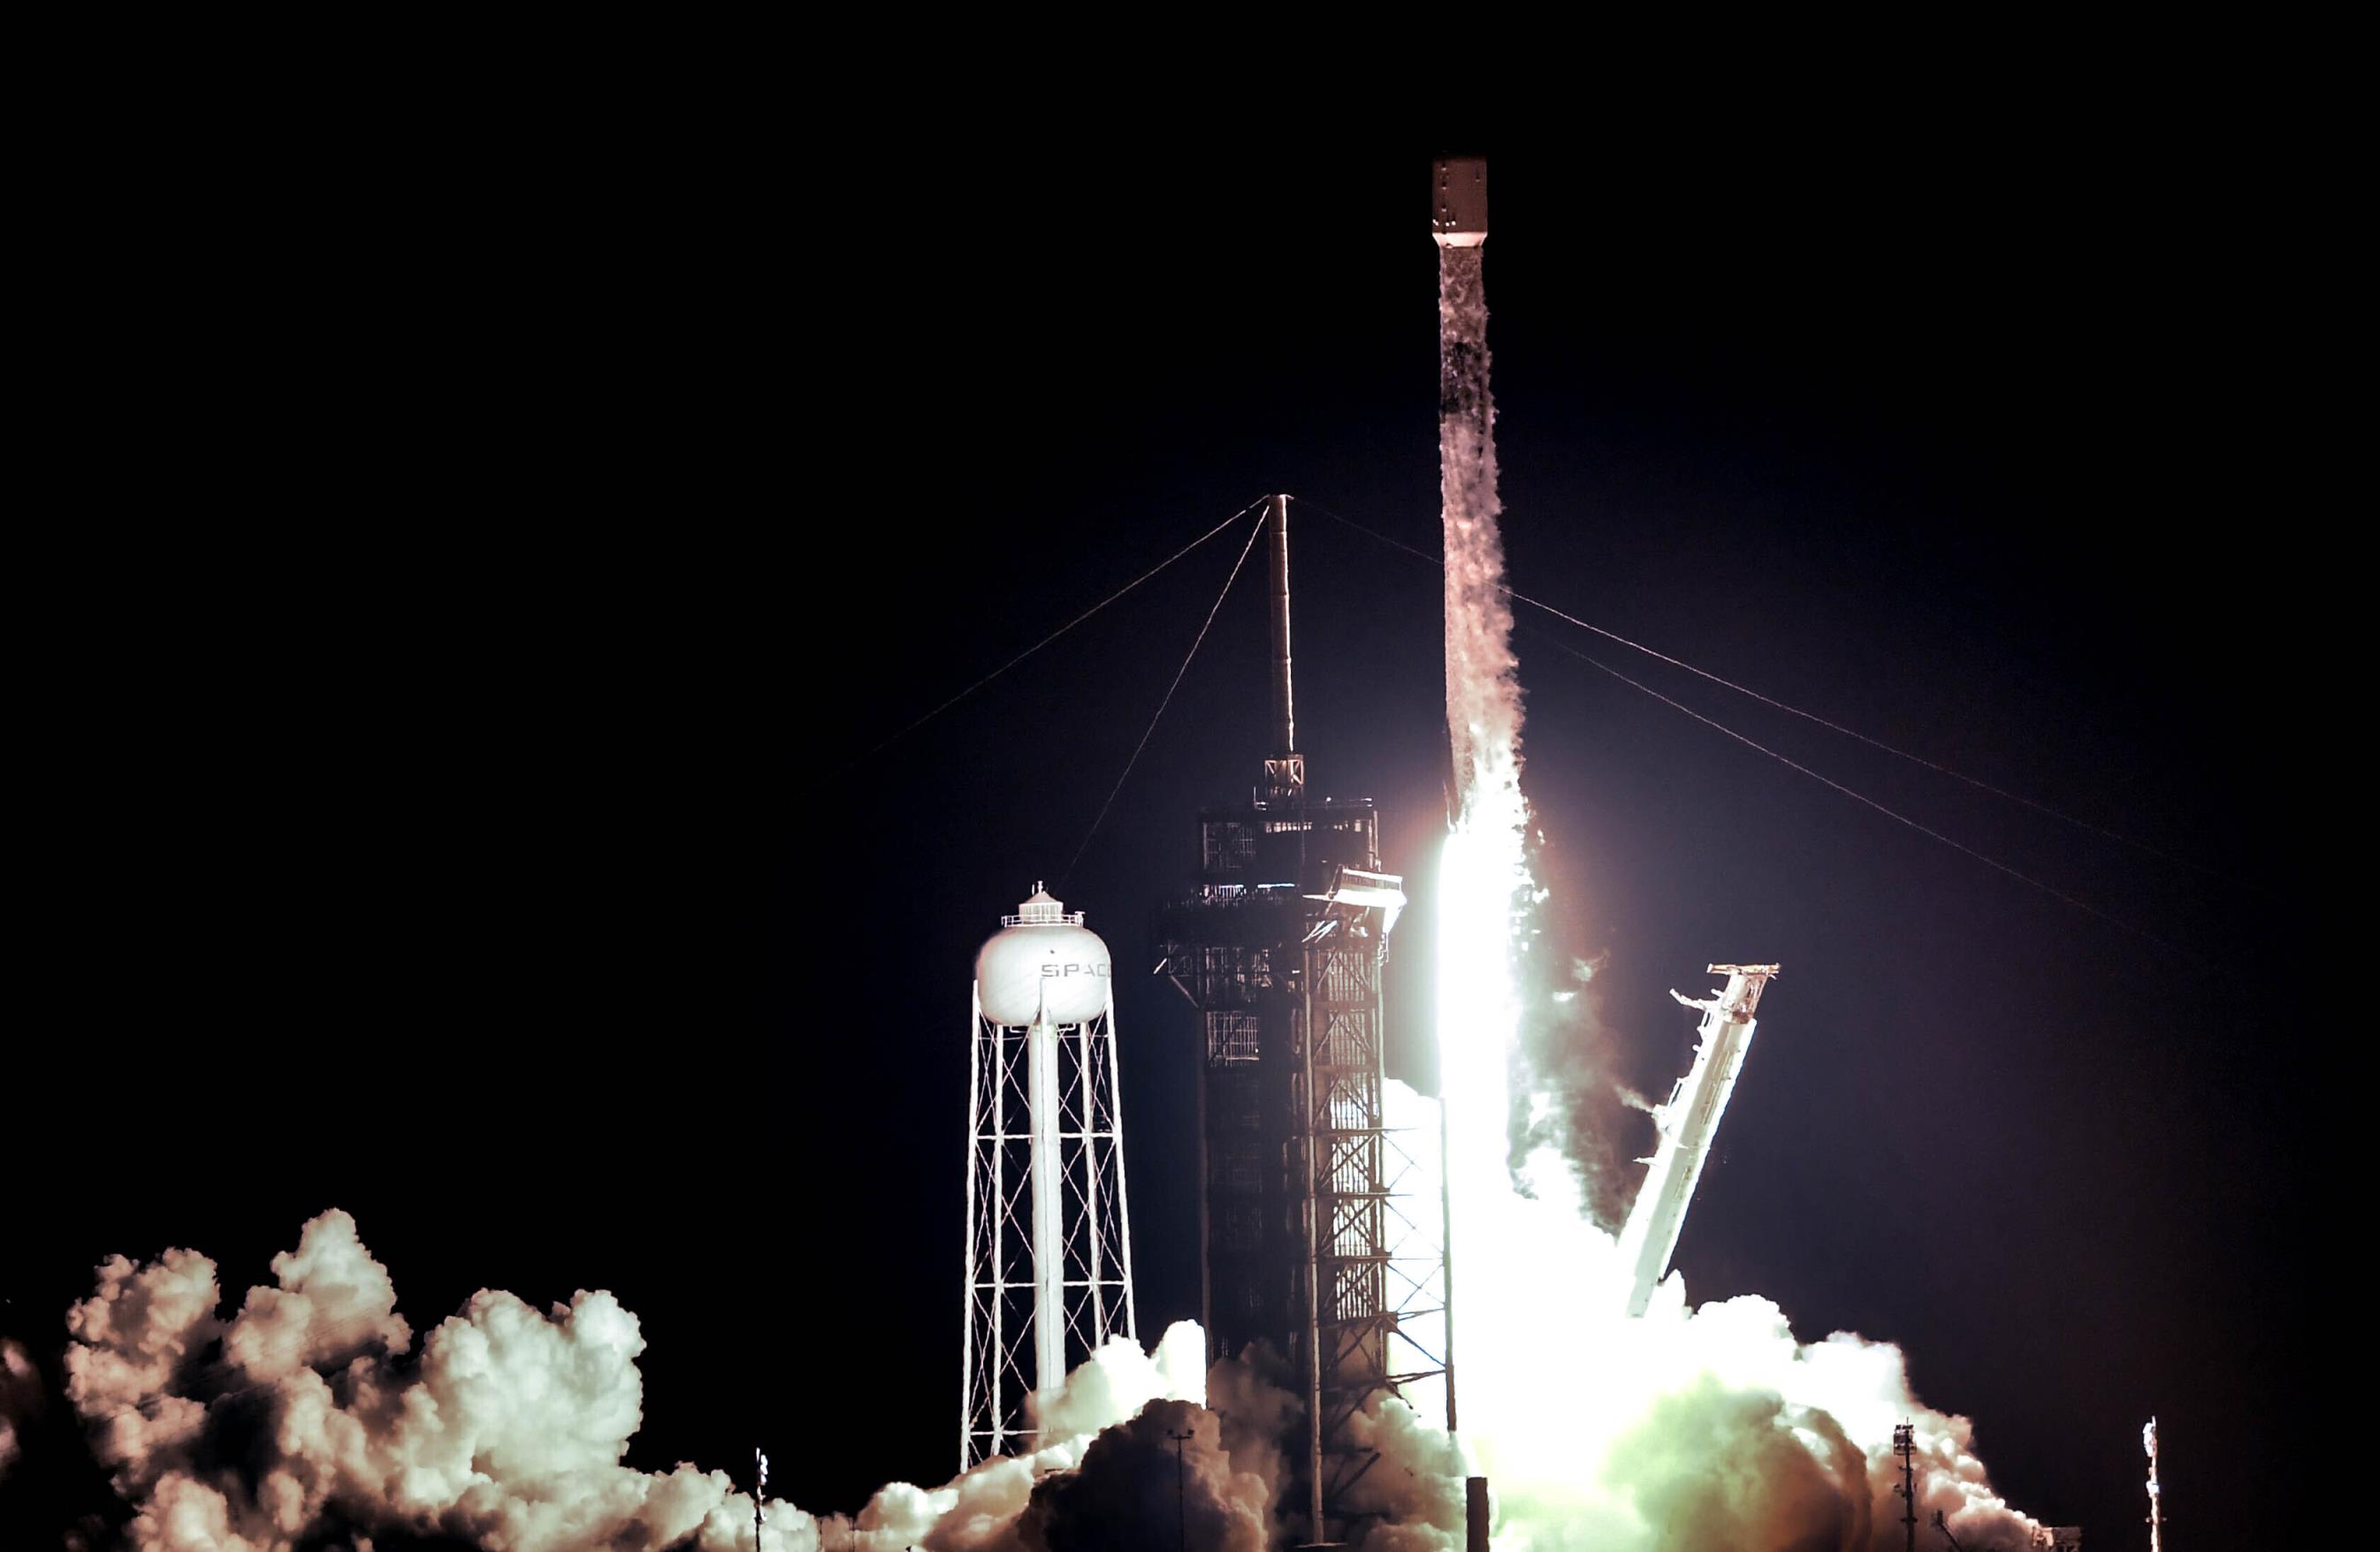 A rocket launched off a launch pad at night.